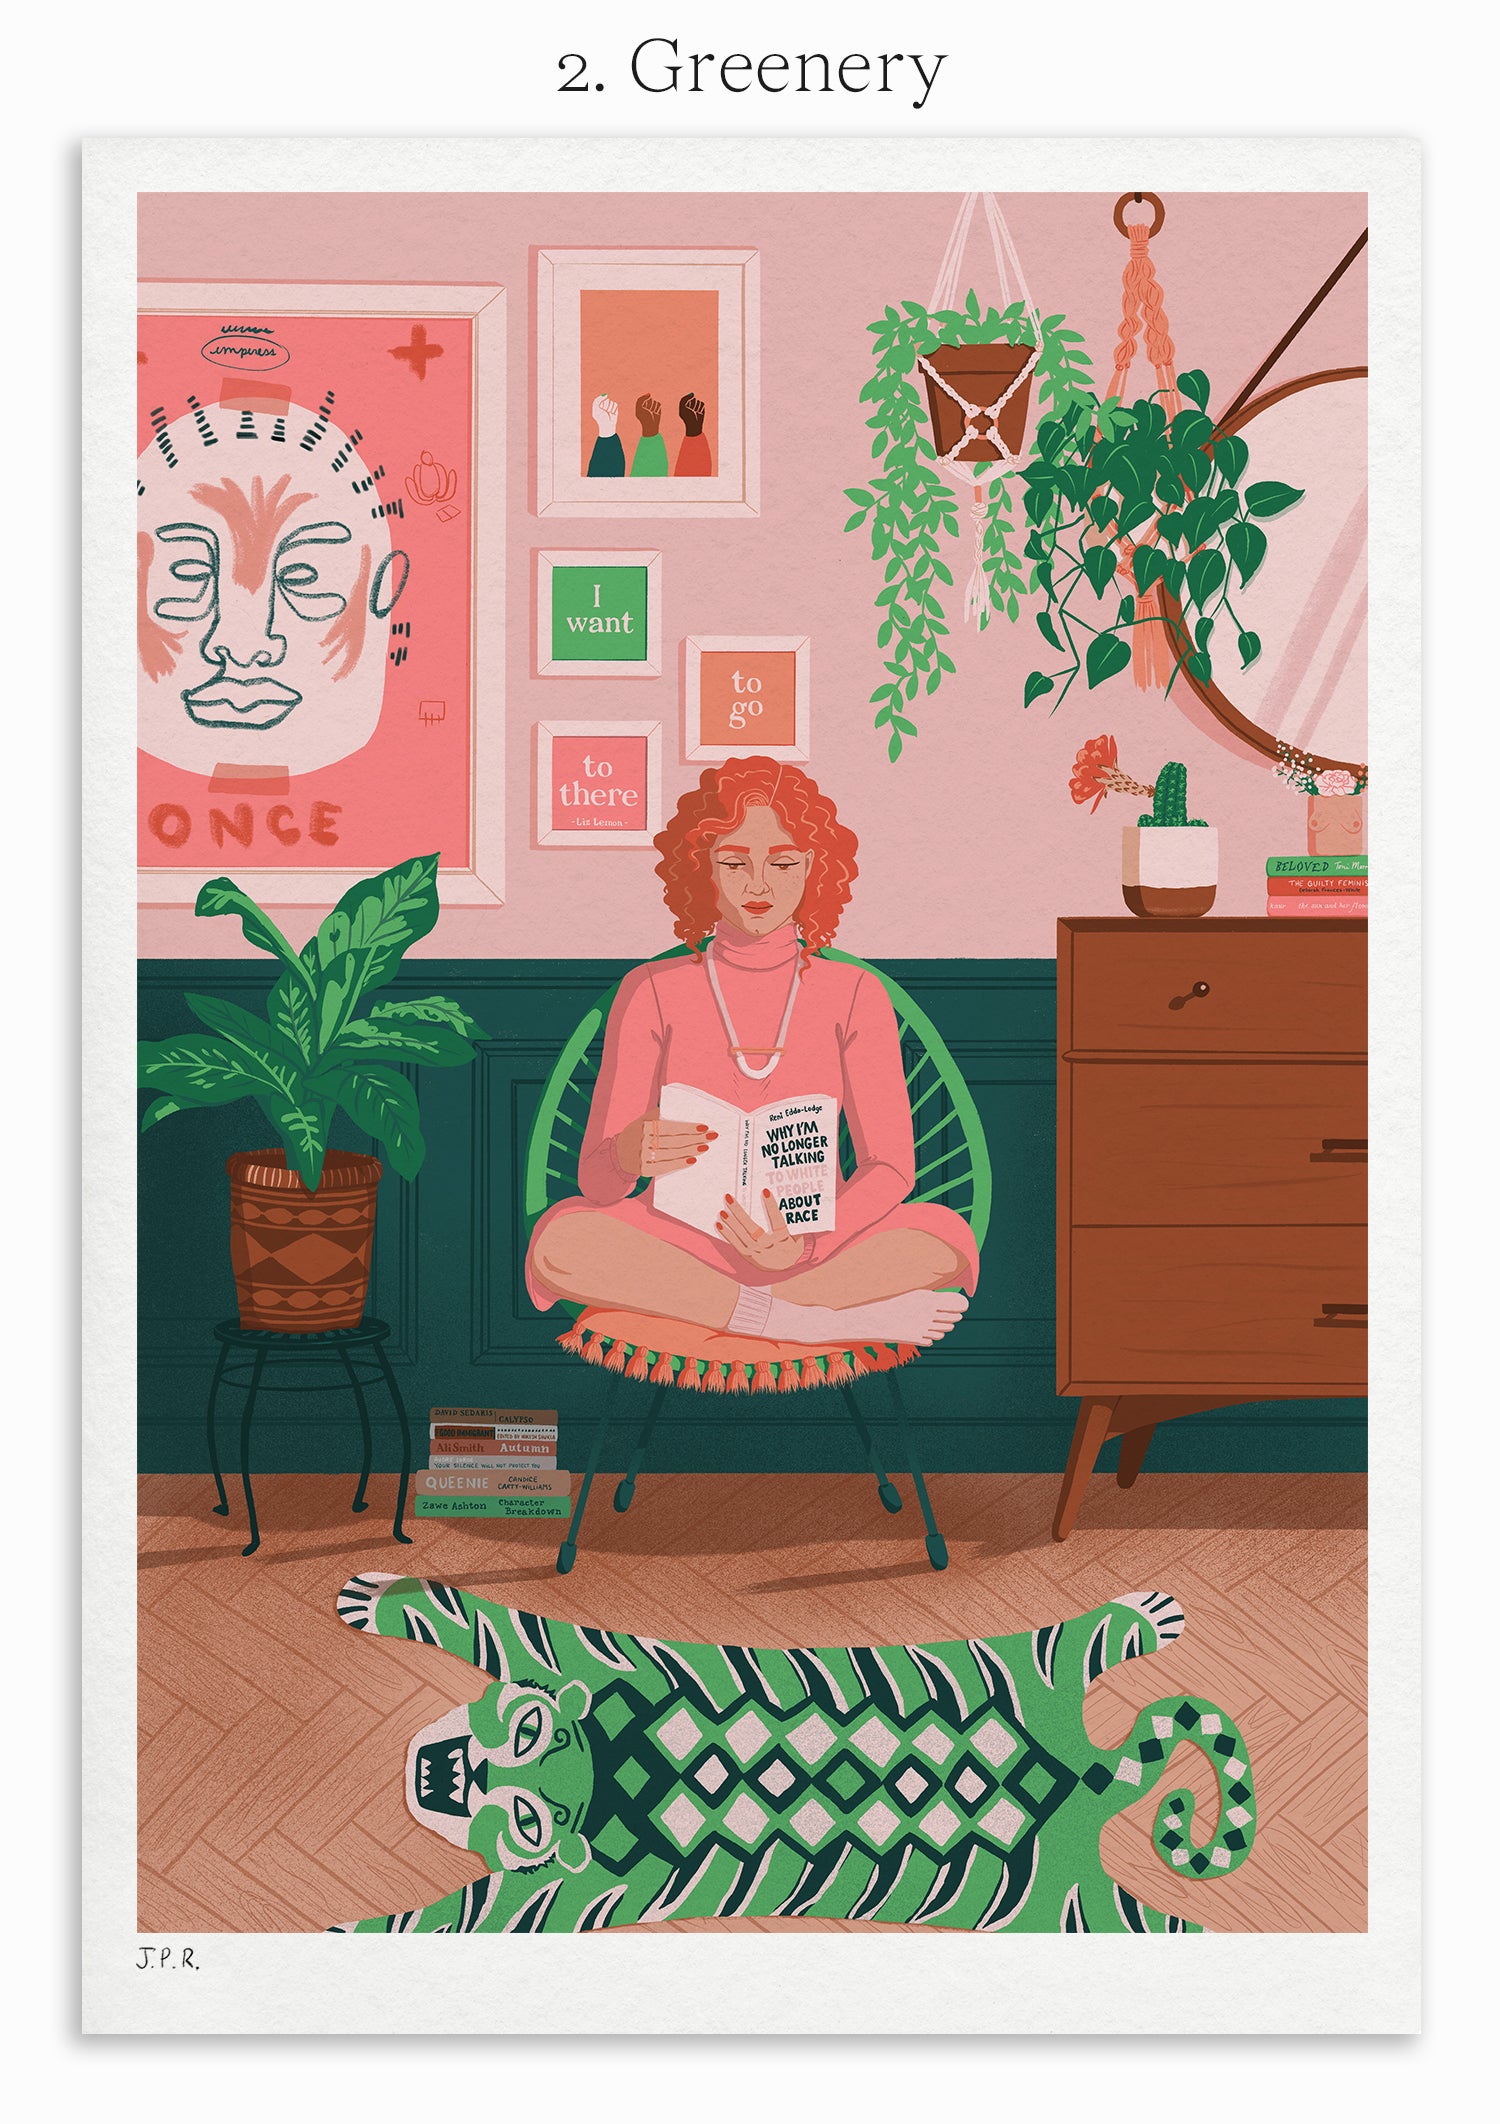 2. Greenery. Illustration of a White woman reading the book Why I'm No Longer Talking To White People About Race by Reni Eddo-Lodge. She is sat in her pink and green living room, surrounded by plants and books.